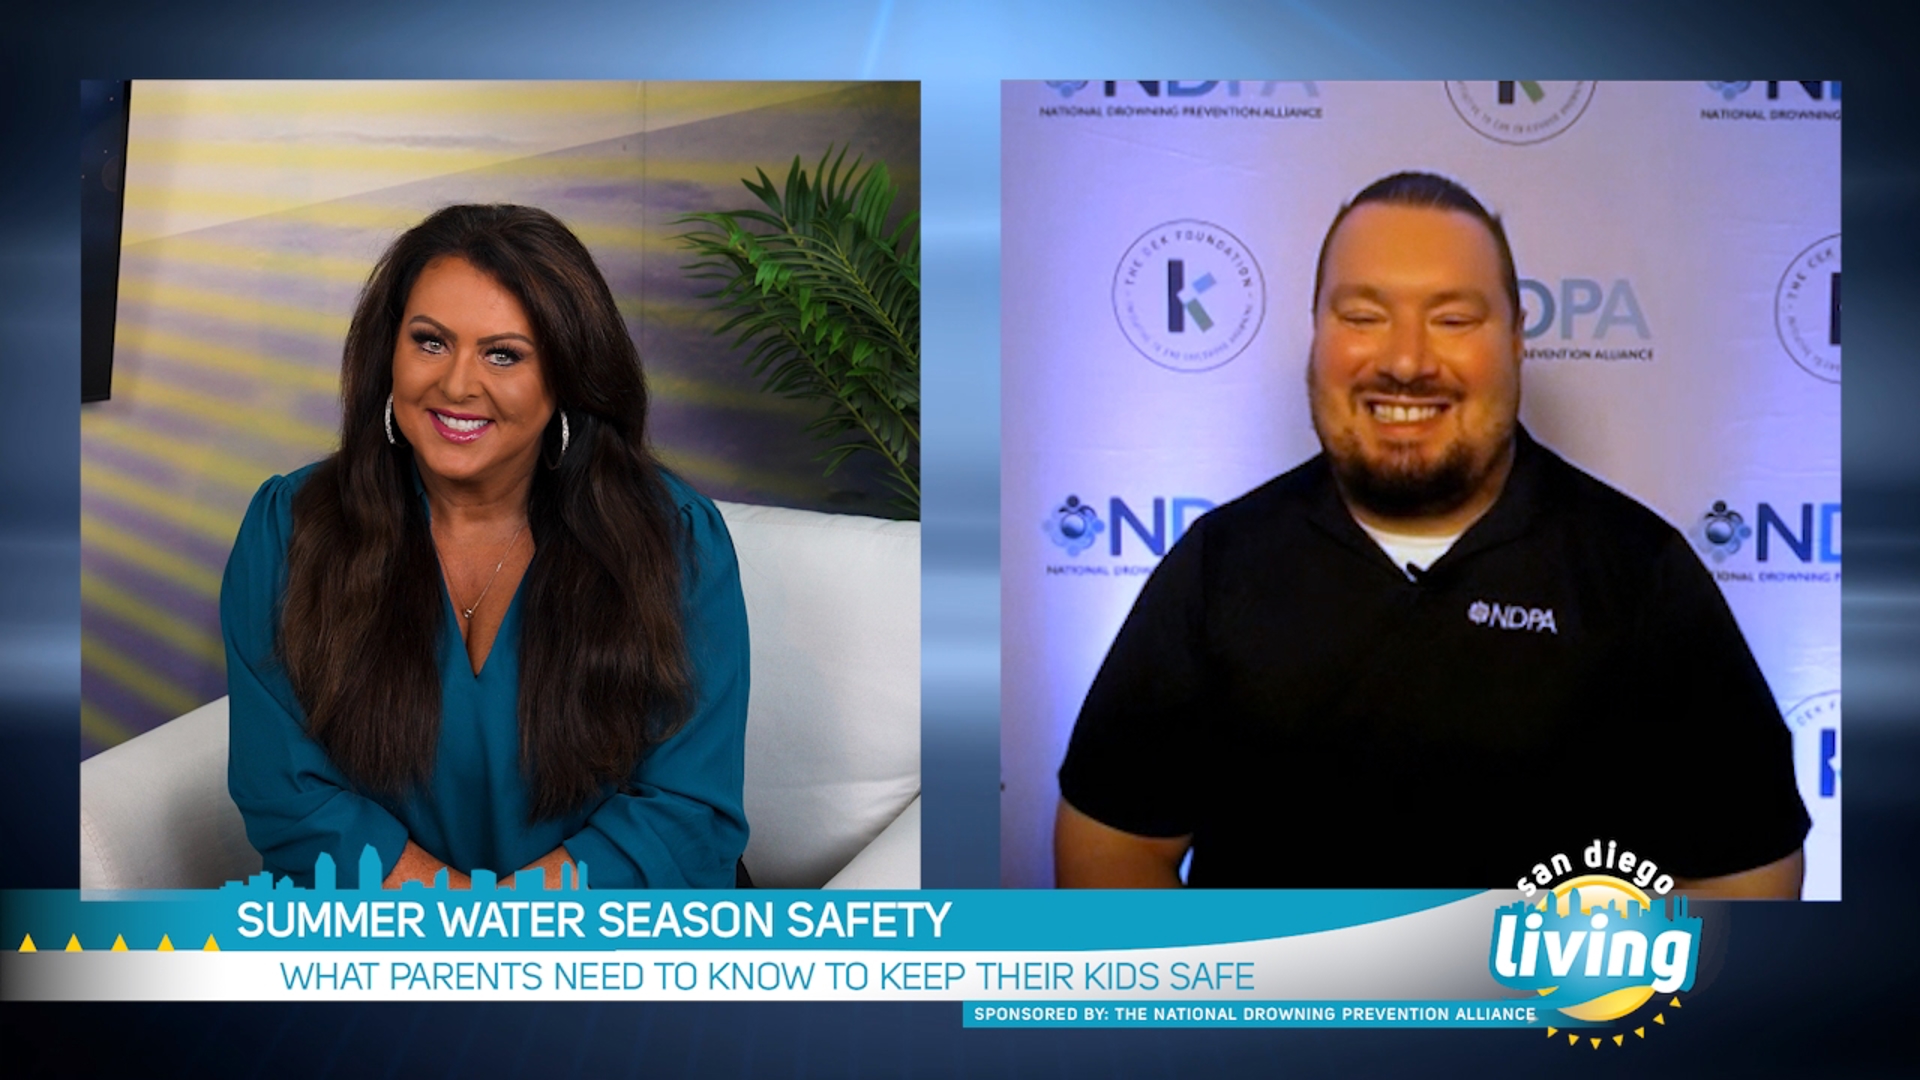 Life-Saving Tips to Keep Your Kids and Family Safe. Sponsored by The National Drowning Prevention Alliance